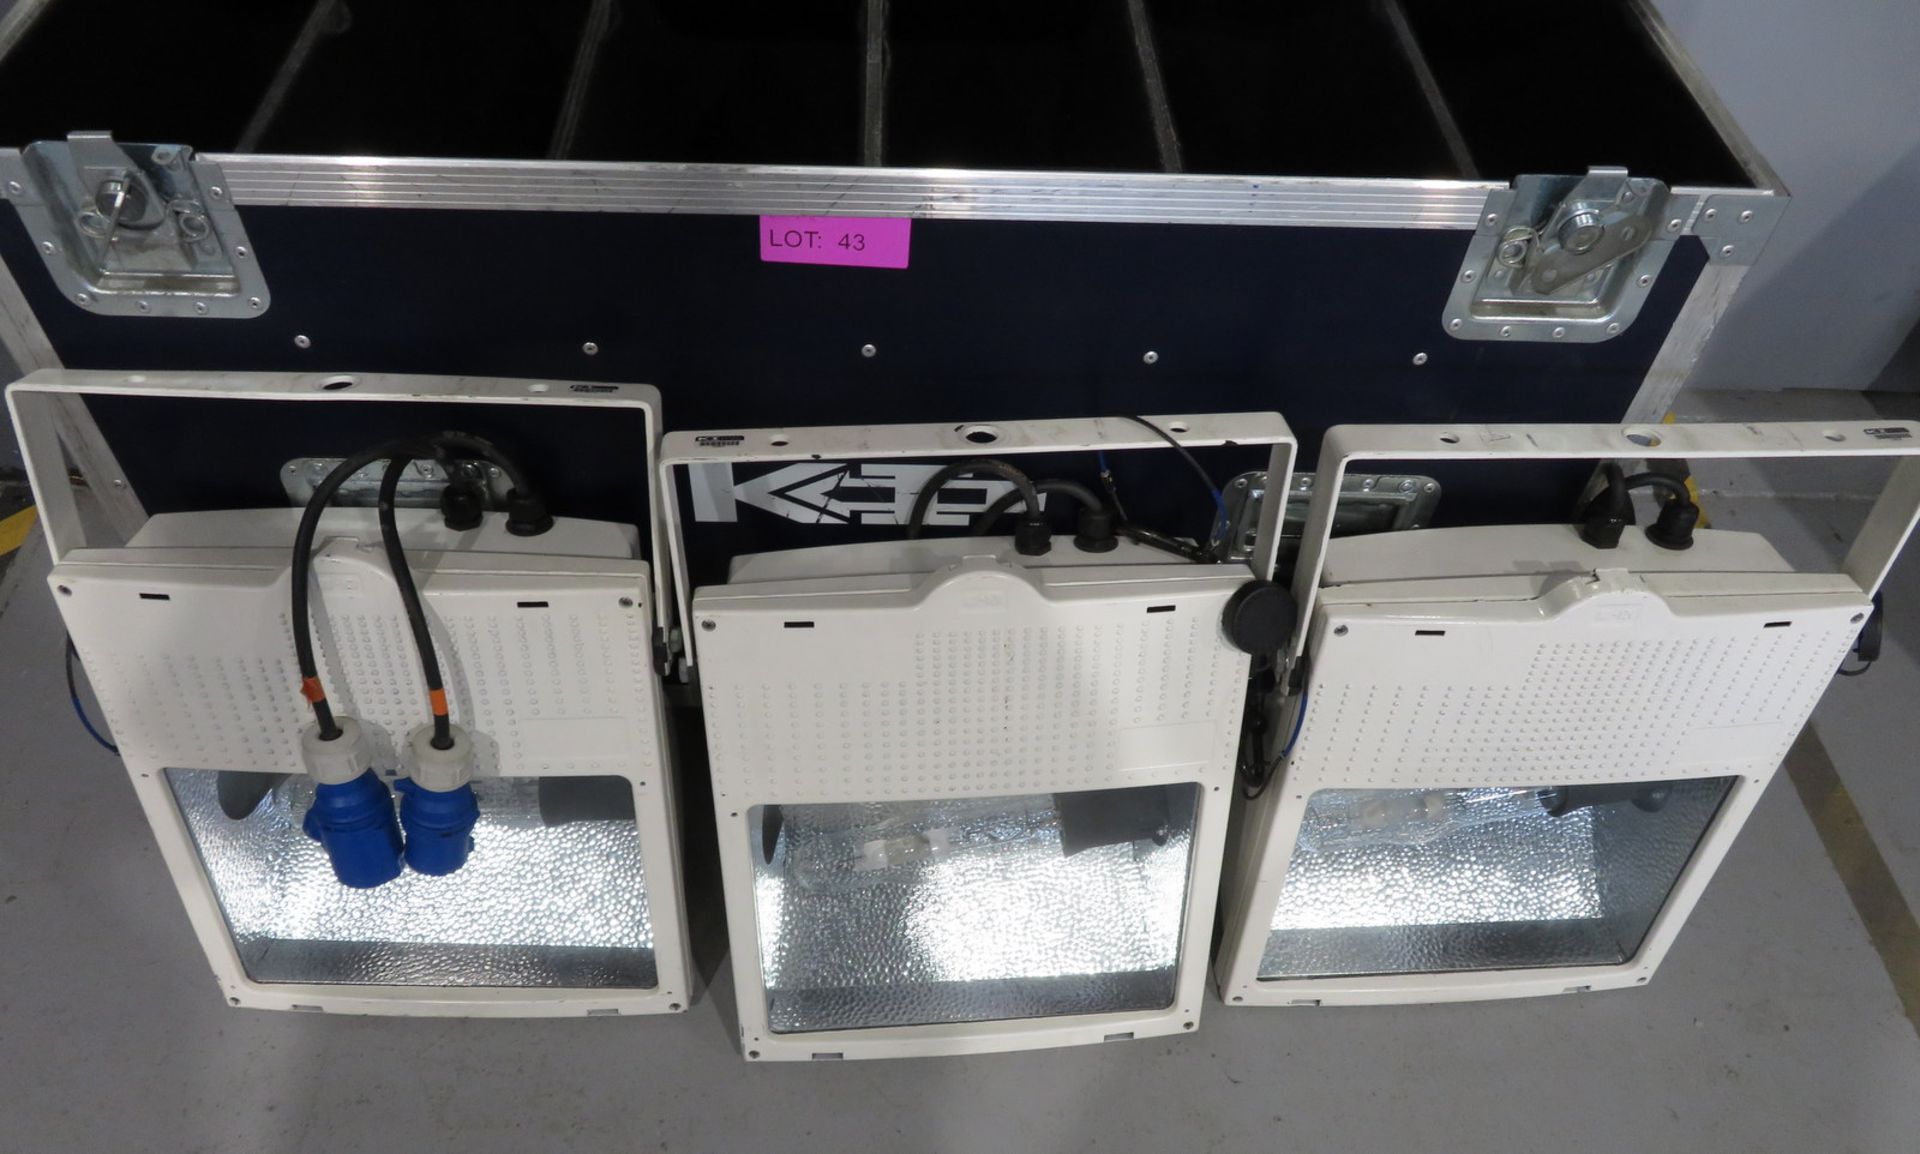 6x HQI 400w Floodlights in flight case. Includes safety bonds. Working condition. - Image 3 of 6